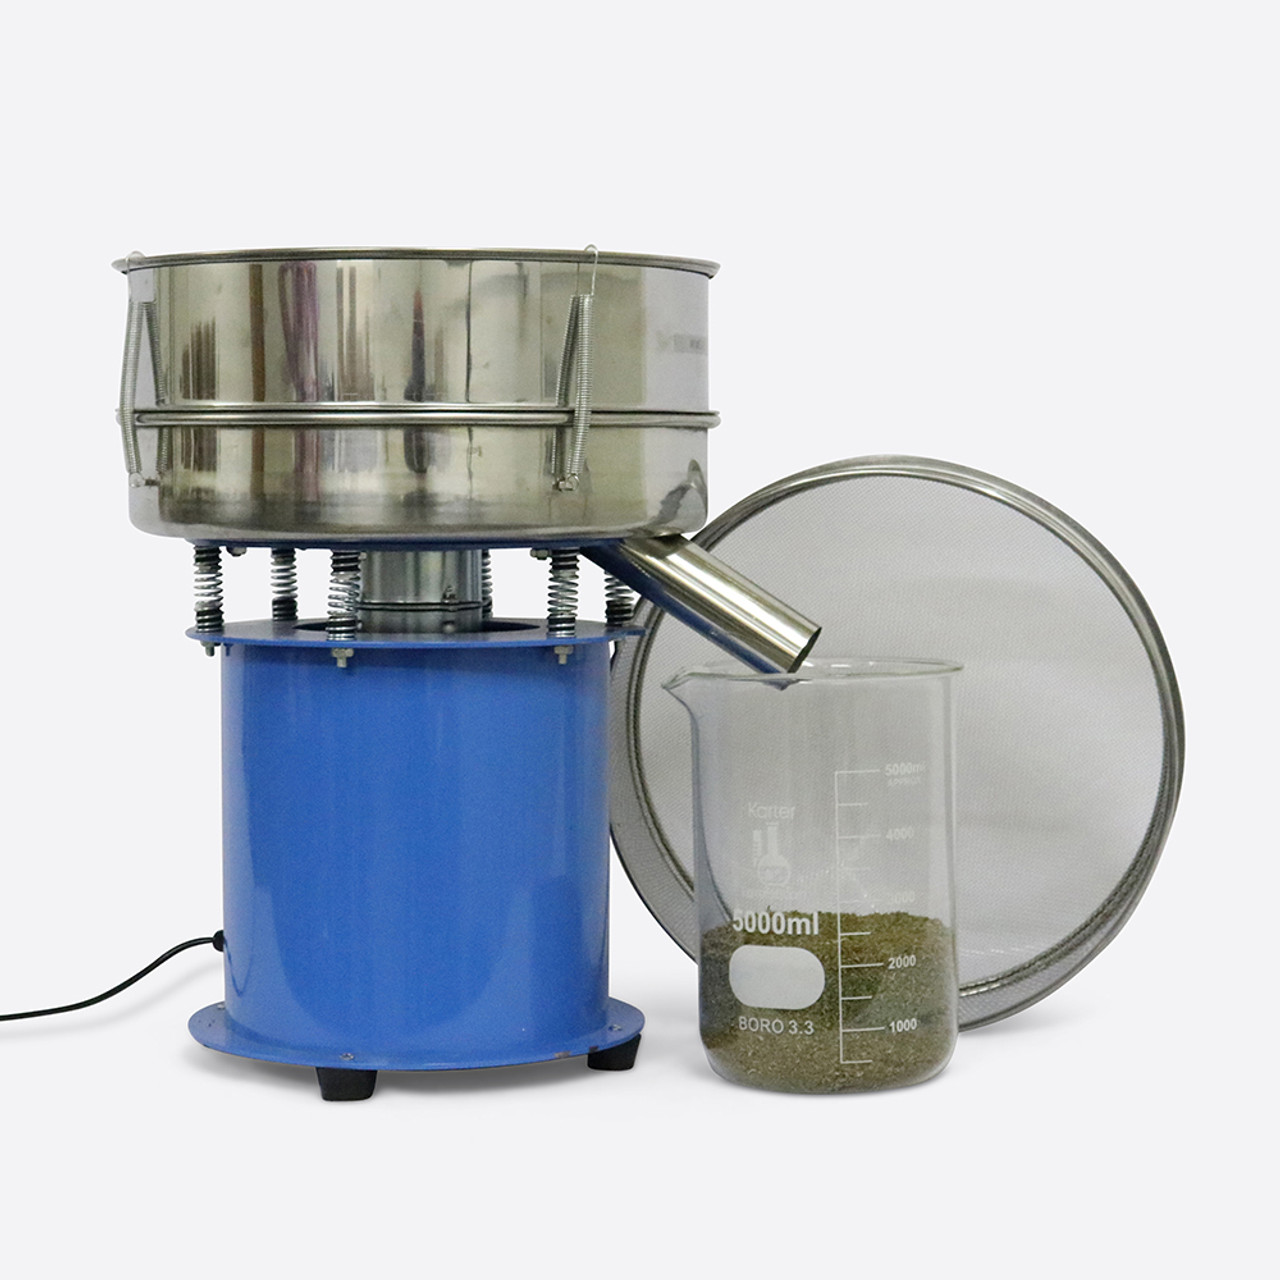 Pre-Roll Grinder and Sifter Starter Kit - Industrial Grinder and Automated  Cannabis Sifter Bundle